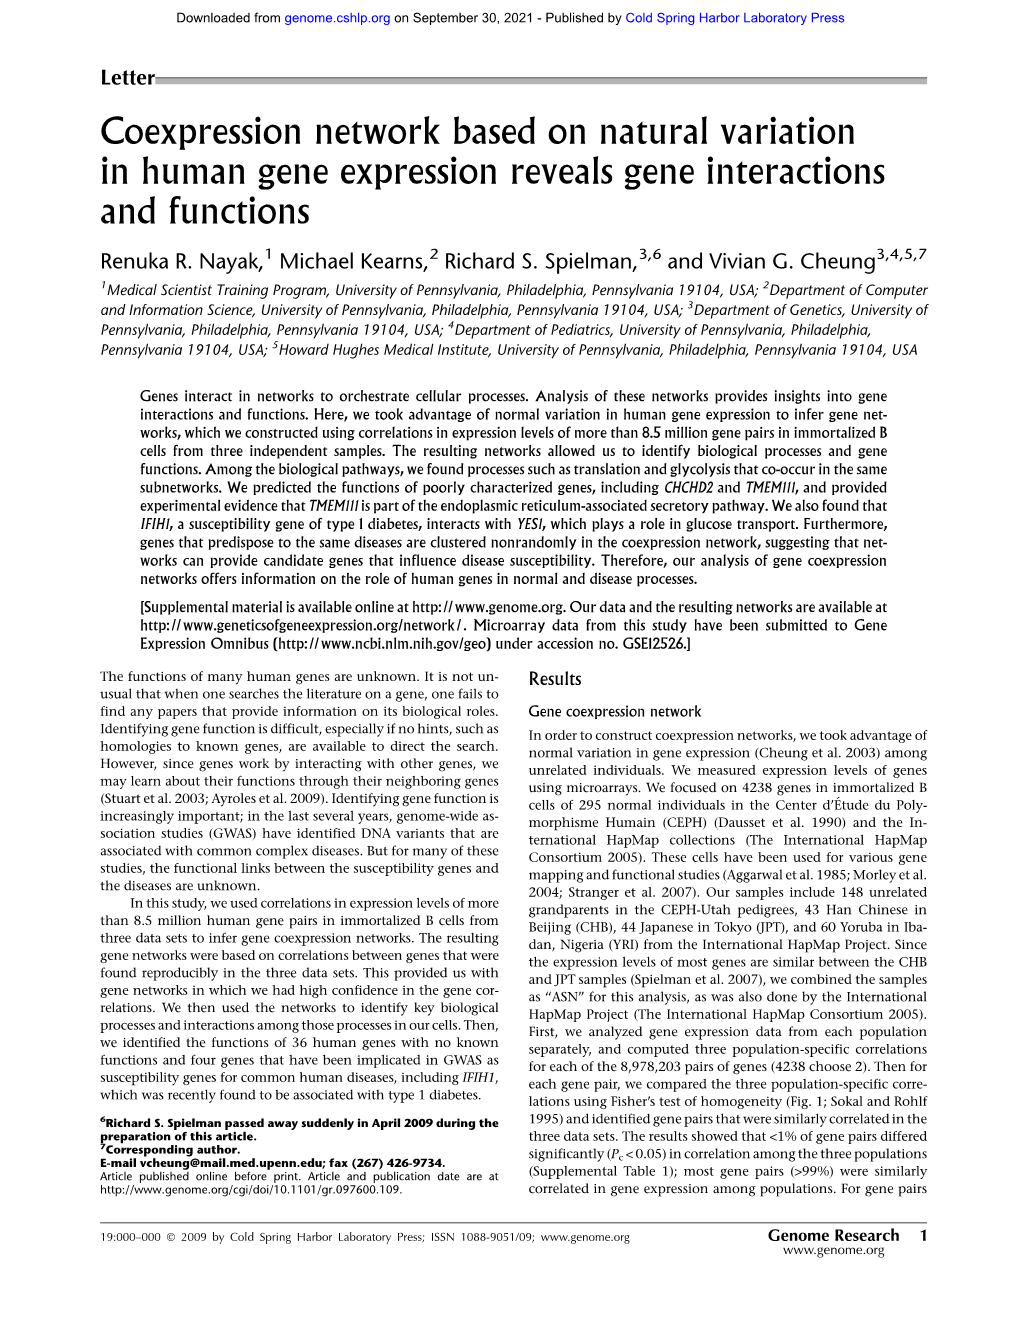 Coexpression Network Based on Natural Variation in Human Gene Expression Reveals Gene Interactions and Functions